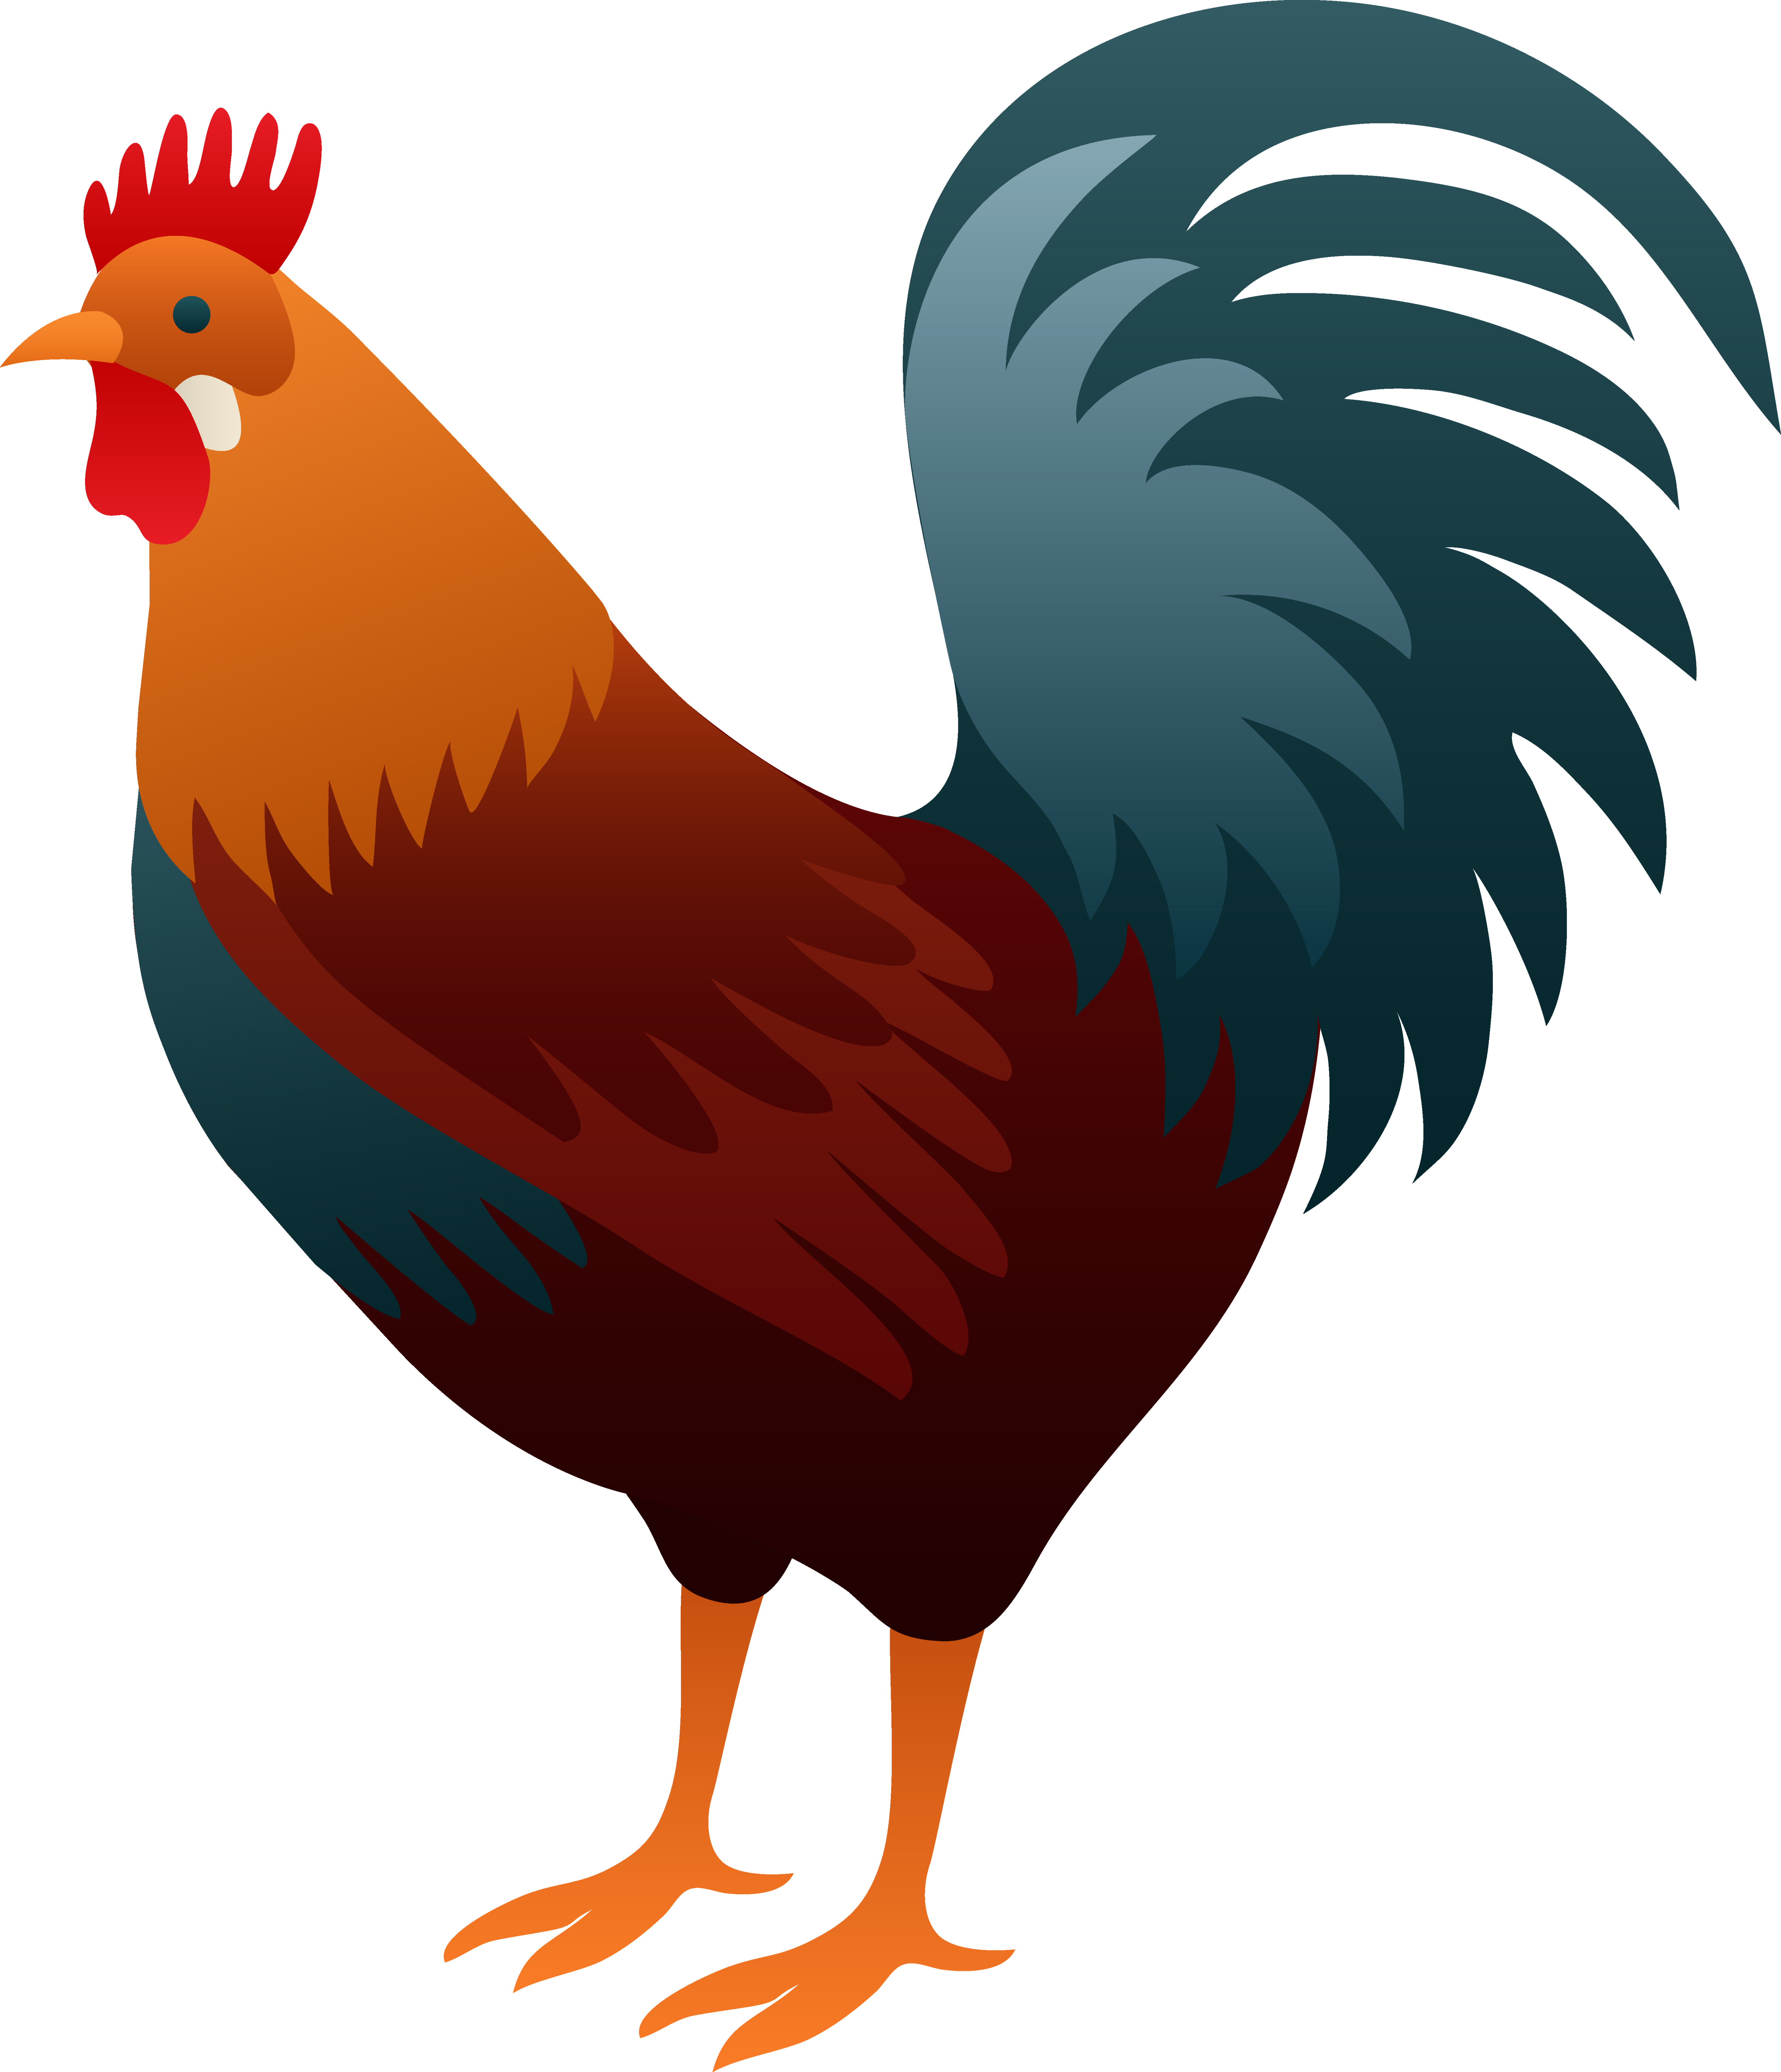 Rooster Clipart - Clipart Kid